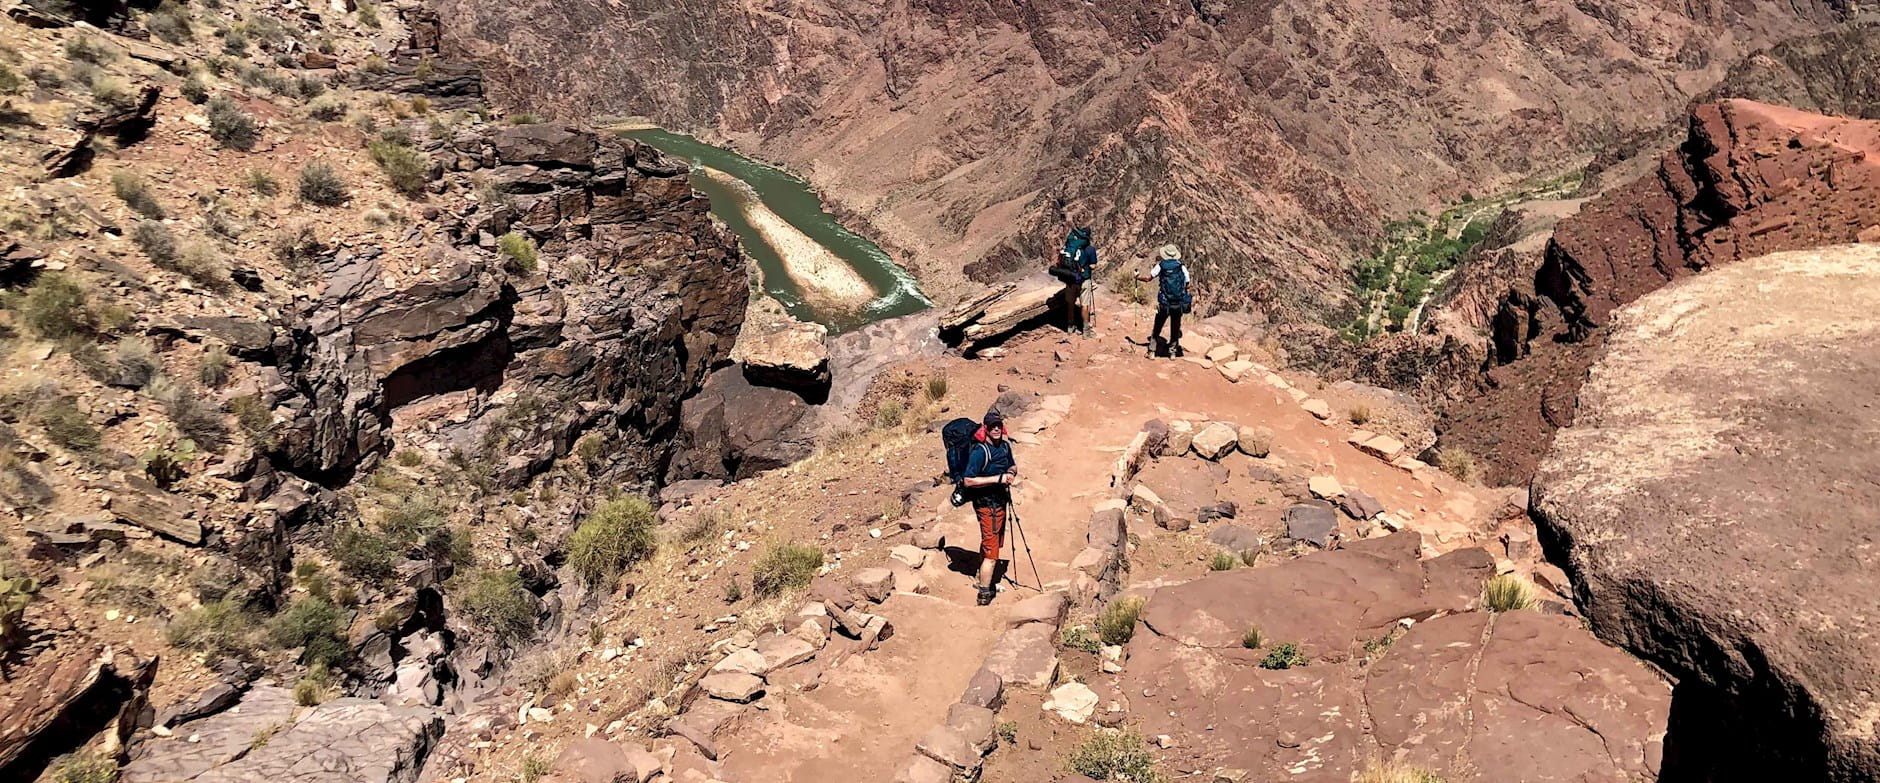 Several people hiking a trail on the Grand Canyon